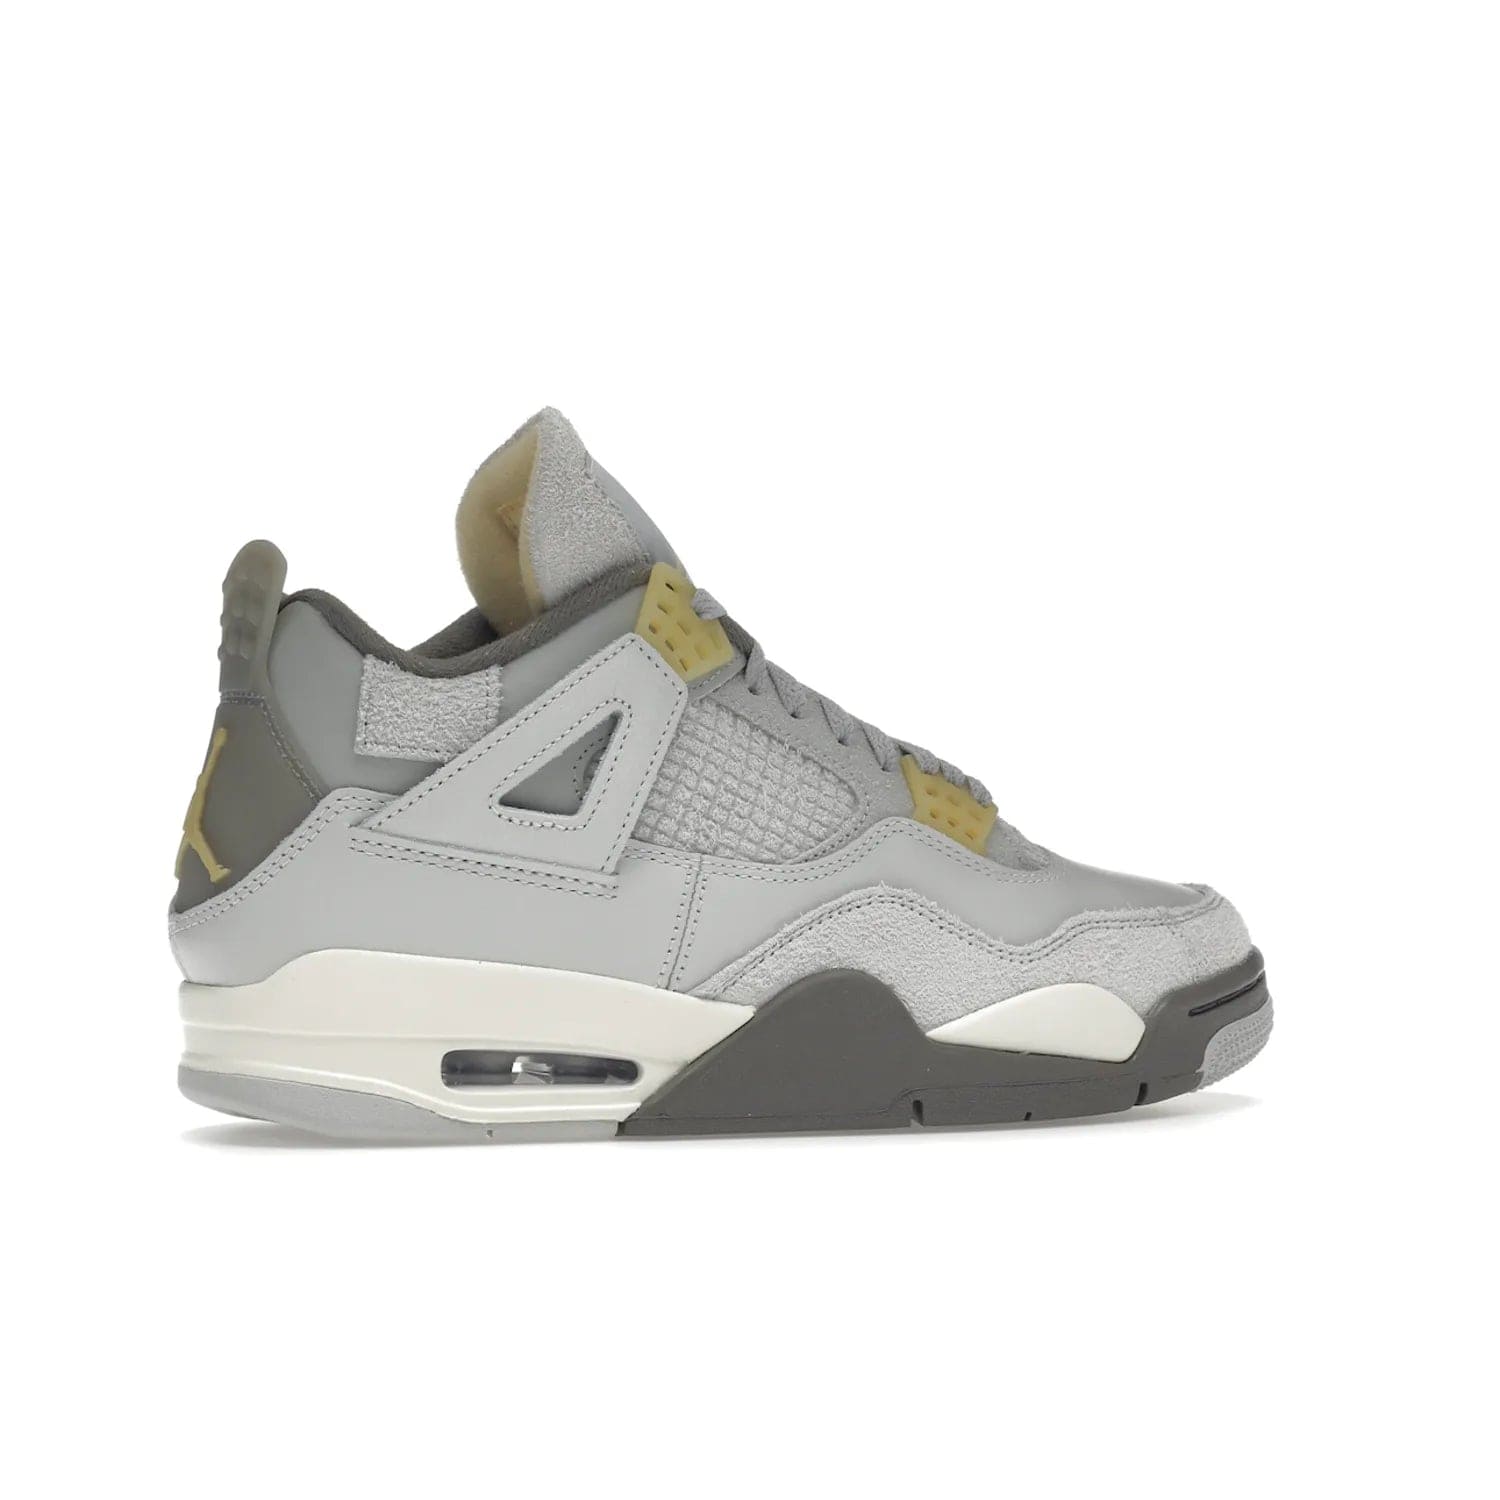 Jordan 4 Retro SE Craft Photon Dust - Image 35 - Only at www.BallersClubKickz.com - Upgrade your shoe collection with the Air Jordan 4 Retro SE Craft Photon Dust. This luxurious sneaker features a combination of suede and leather with unique grey tones like Photon Dust, Pale Vanilla, Off White, Grey Fog, Flat Pewter, and Sail. Available February 11, 2023.